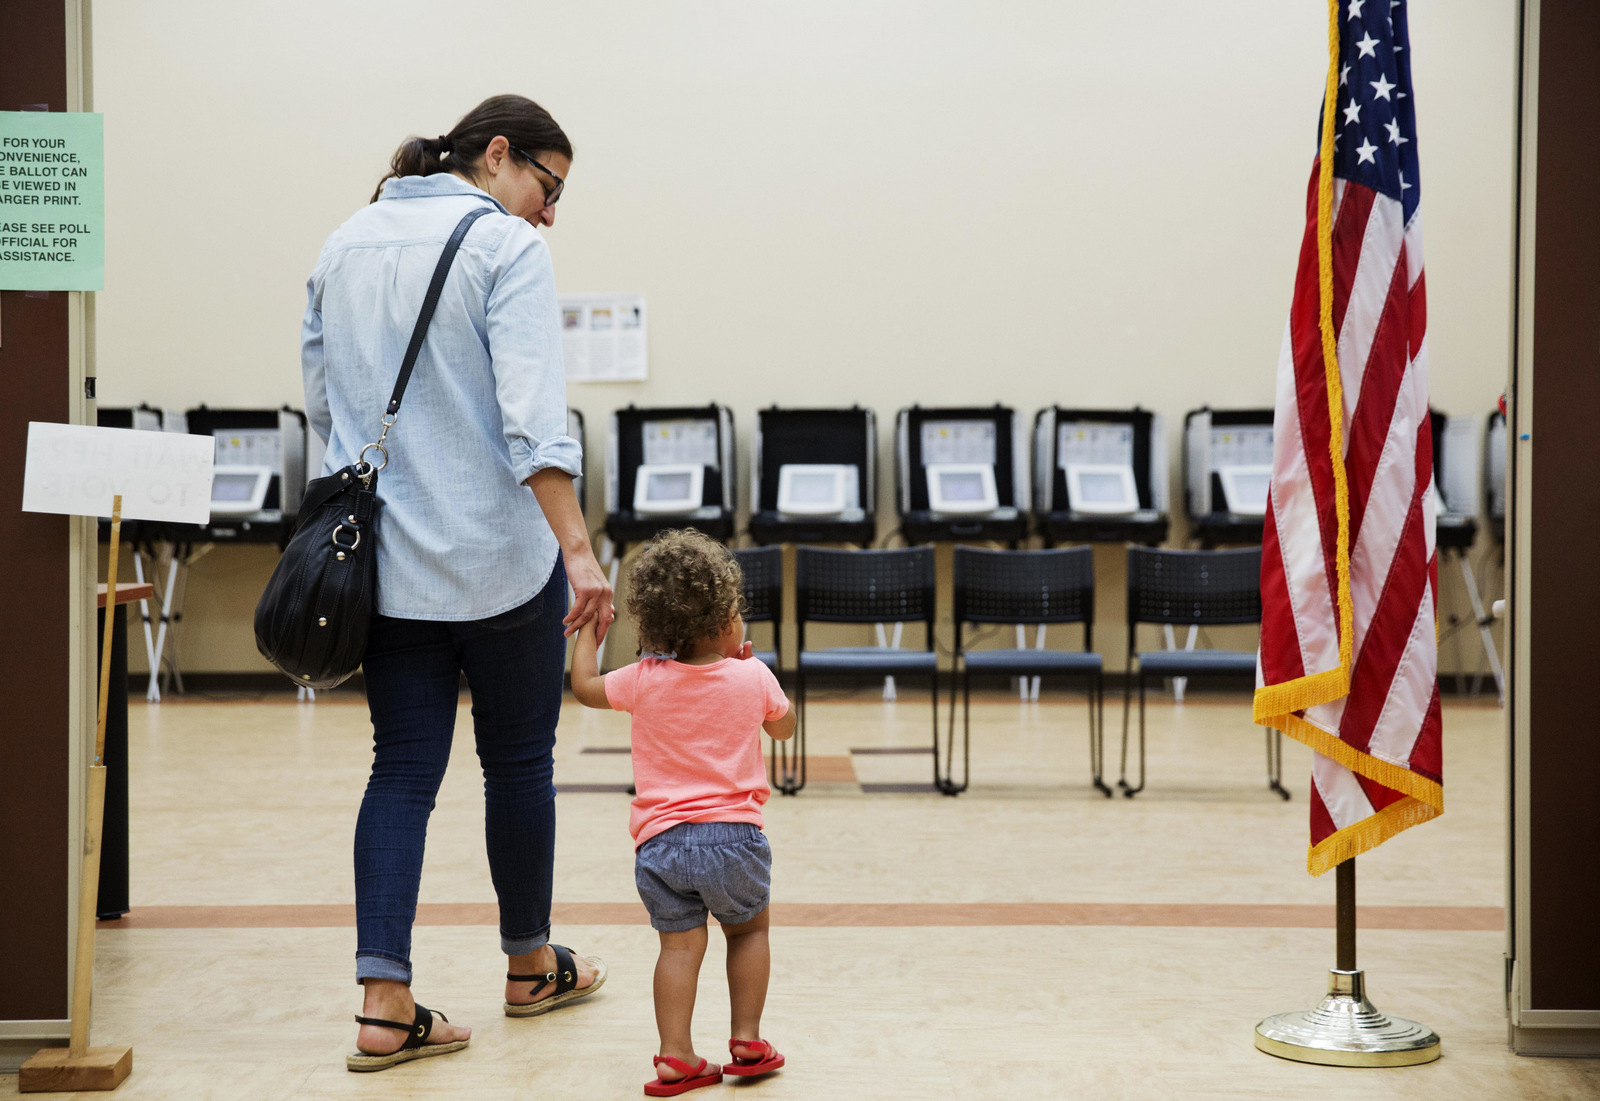 Melissa Painter walks with her daughter to vote in Georgia's 6th Congressional District special election at a polling site in Sandy Springs, Ga., June 20, 2017. (AP/David Goldman)